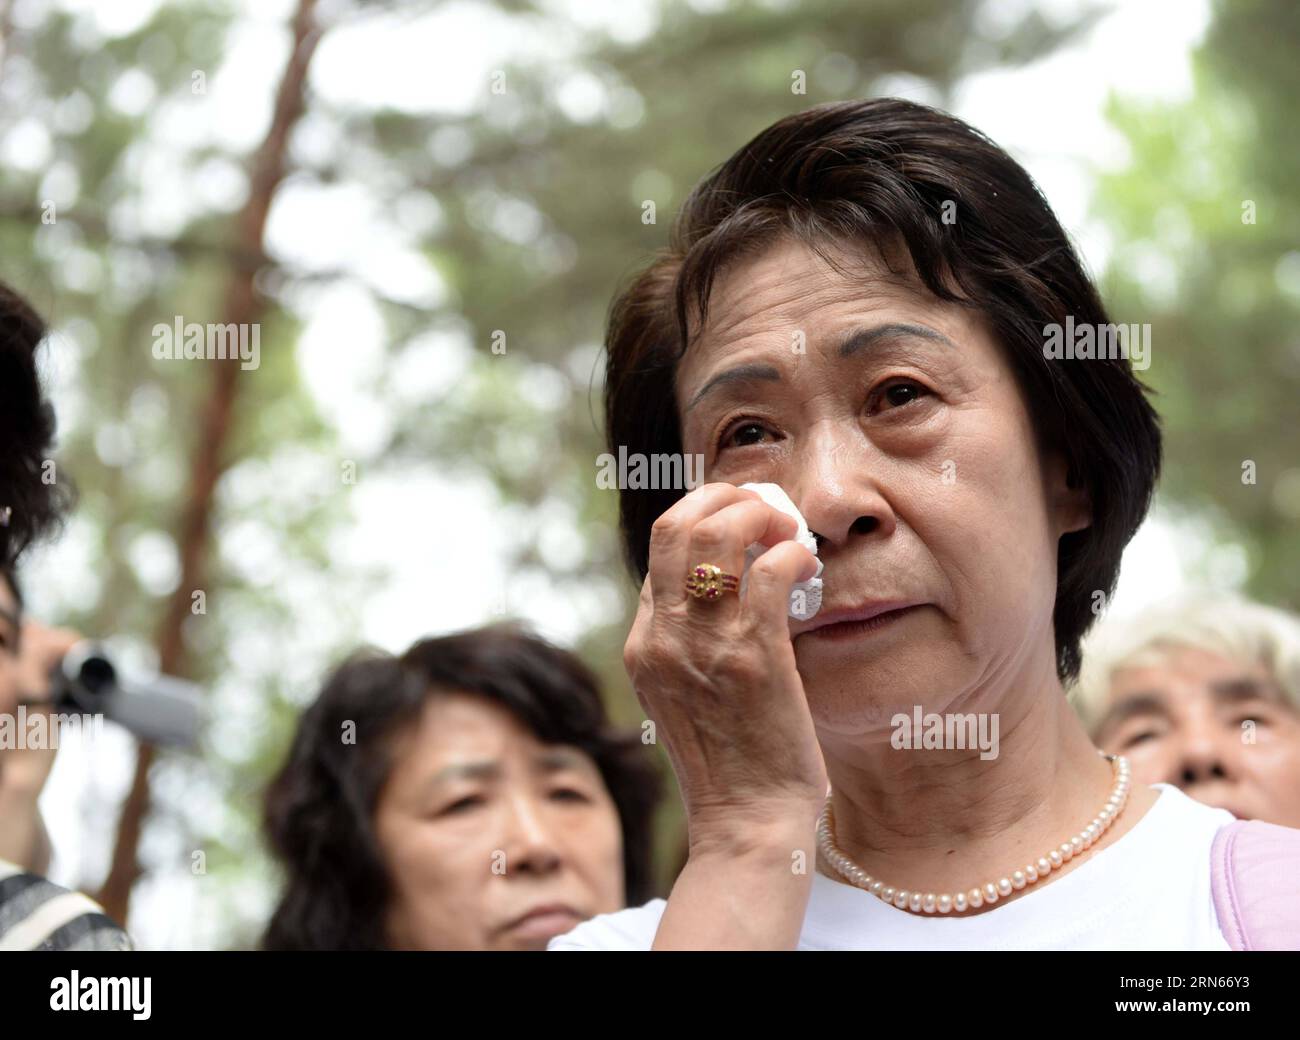 Ikeda Sumie, director general of a Tokyo support group for those Japanese returned from China, weeps in front of a grave in a cemetery to memorize adoptive Chinese parents in Fangzheng County near Harbin, capital of northeast China s Heilongjiang Province, July 13, 2015. A group of 54 Japanese citizens, all now orphans, on Monday paid a visit to the graves of their adoptive Chinese parents here. Abandoned by their birth parents during the hasty retreat at the end of World War II in 1945, the orphans, now over 70 years old, were taken in and raised by the very Chinese residents of those northea Stock Photo